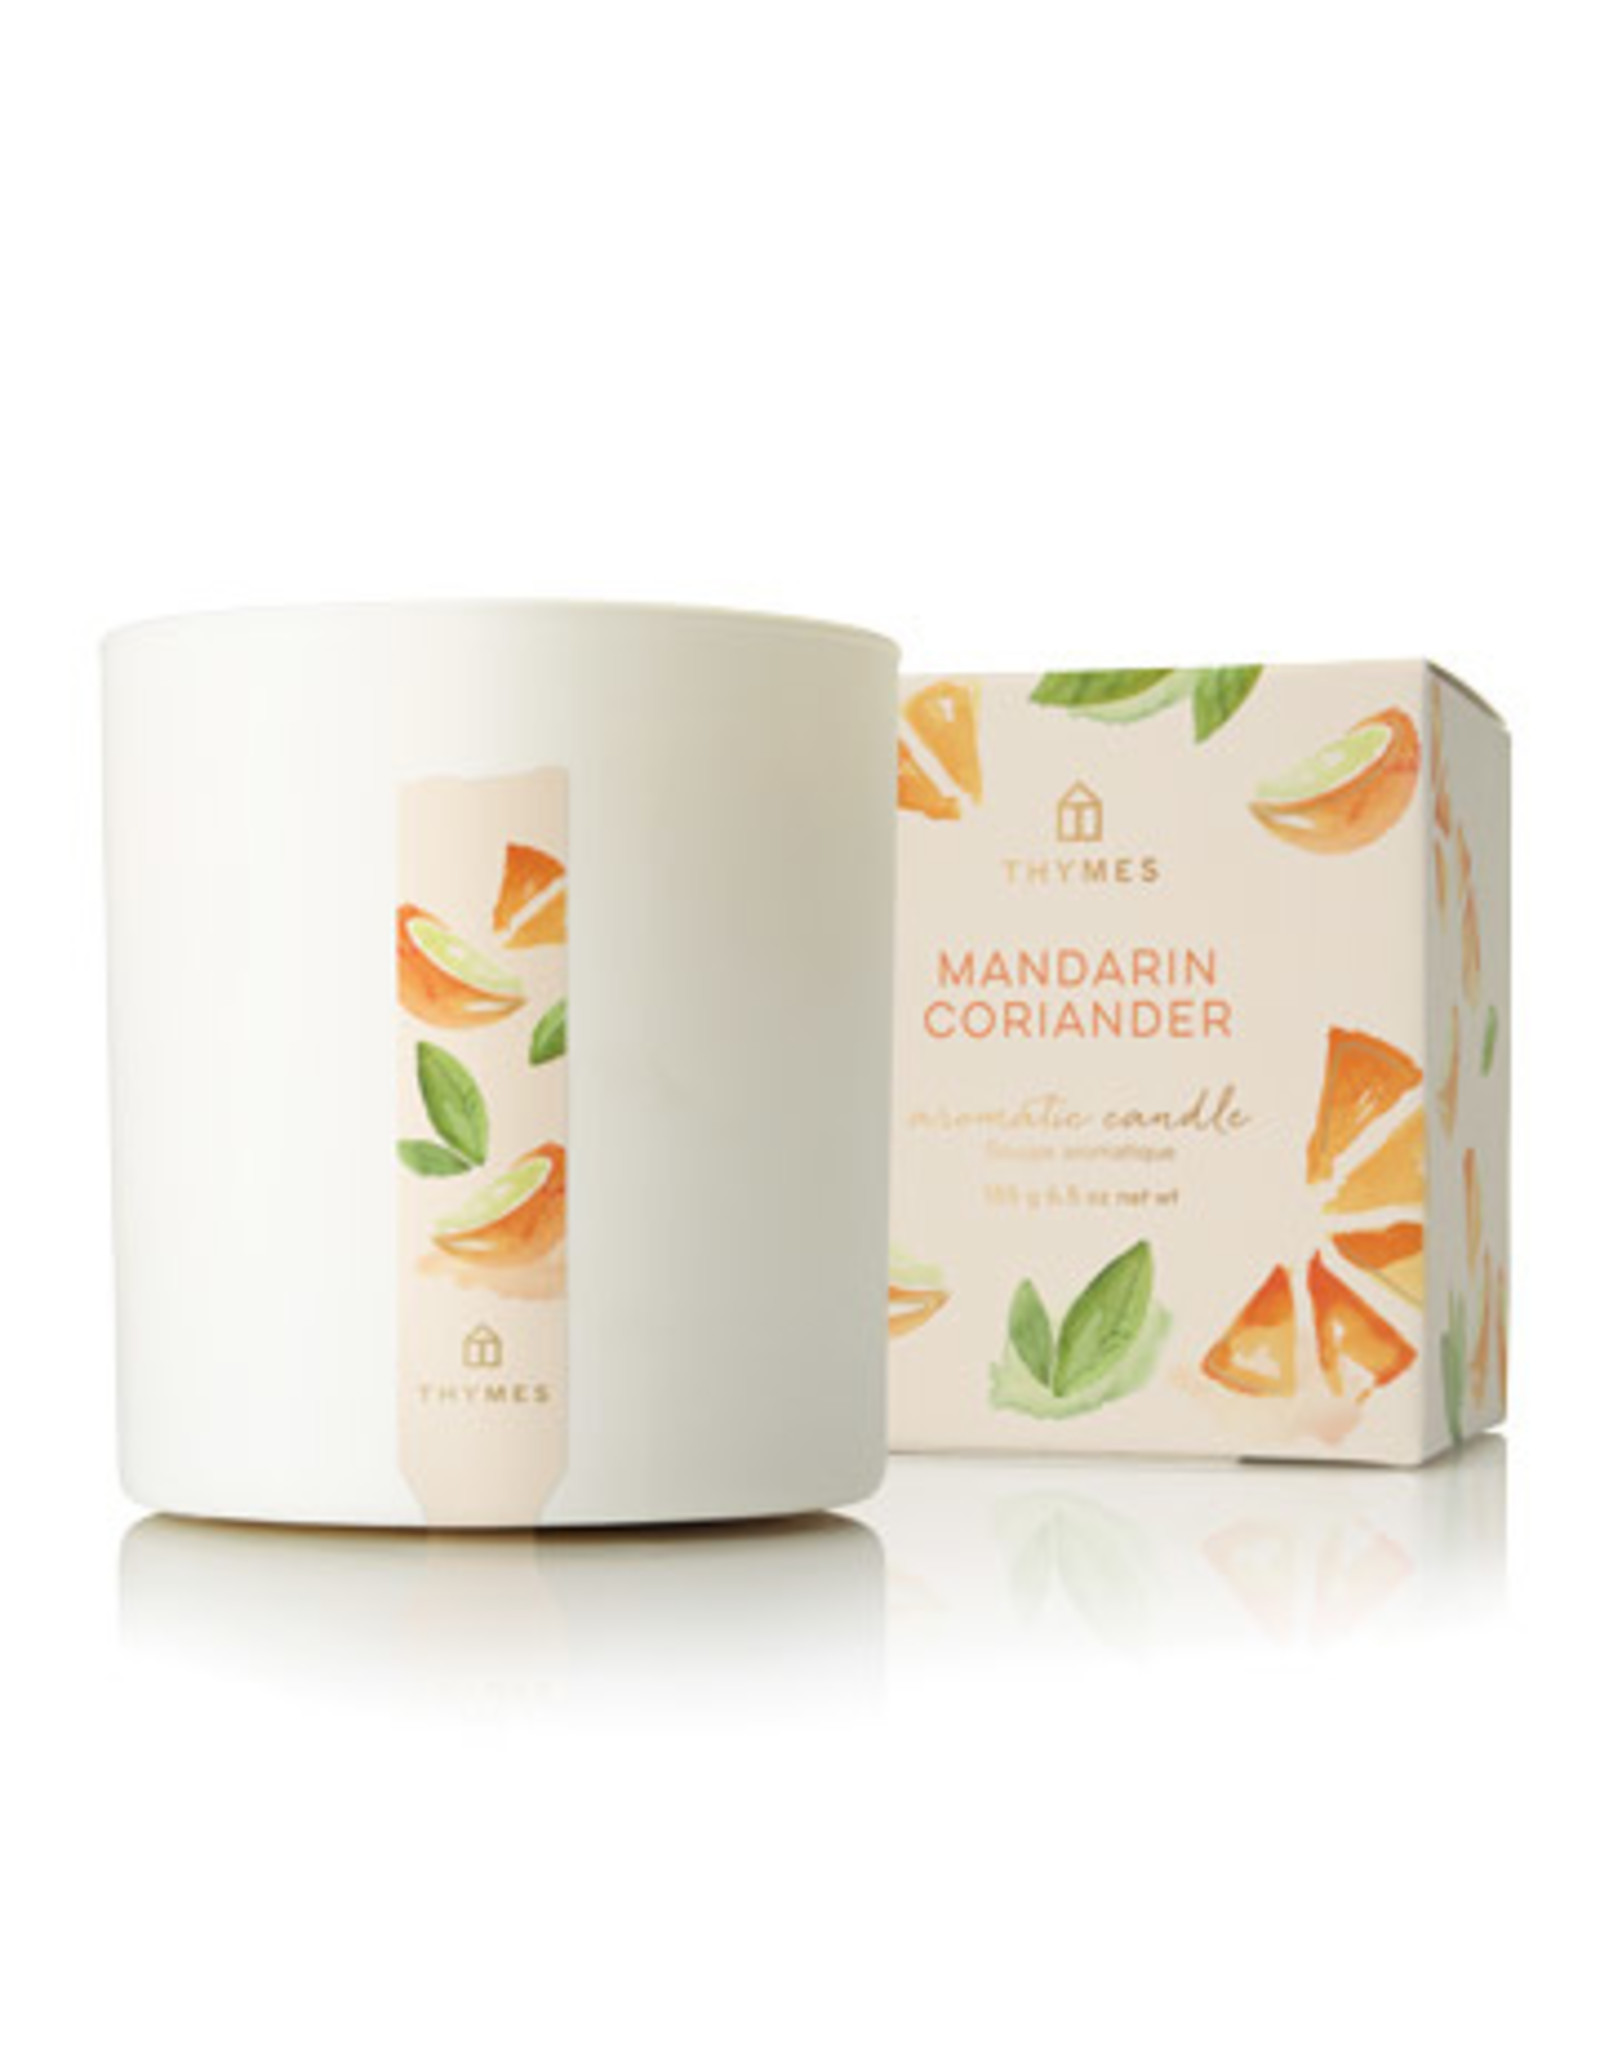 Thymes Mandarin Coriander Poured Candle 10 oz